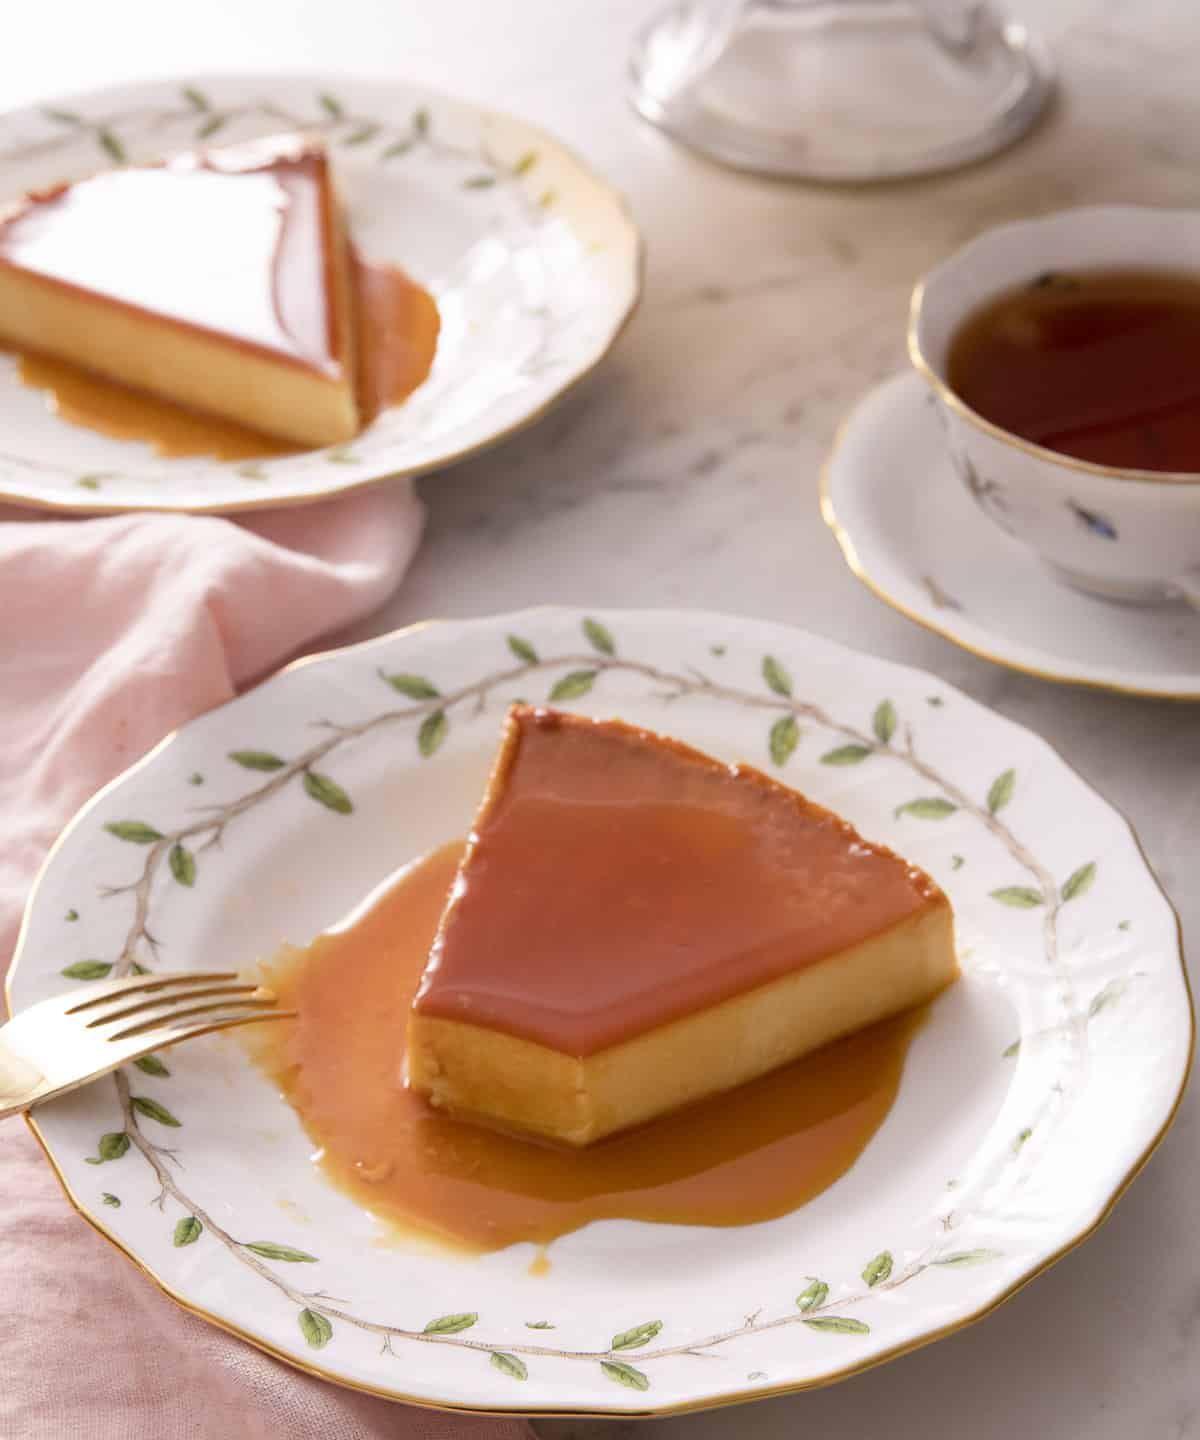 A piece of flan on a plate with a bite taken out.